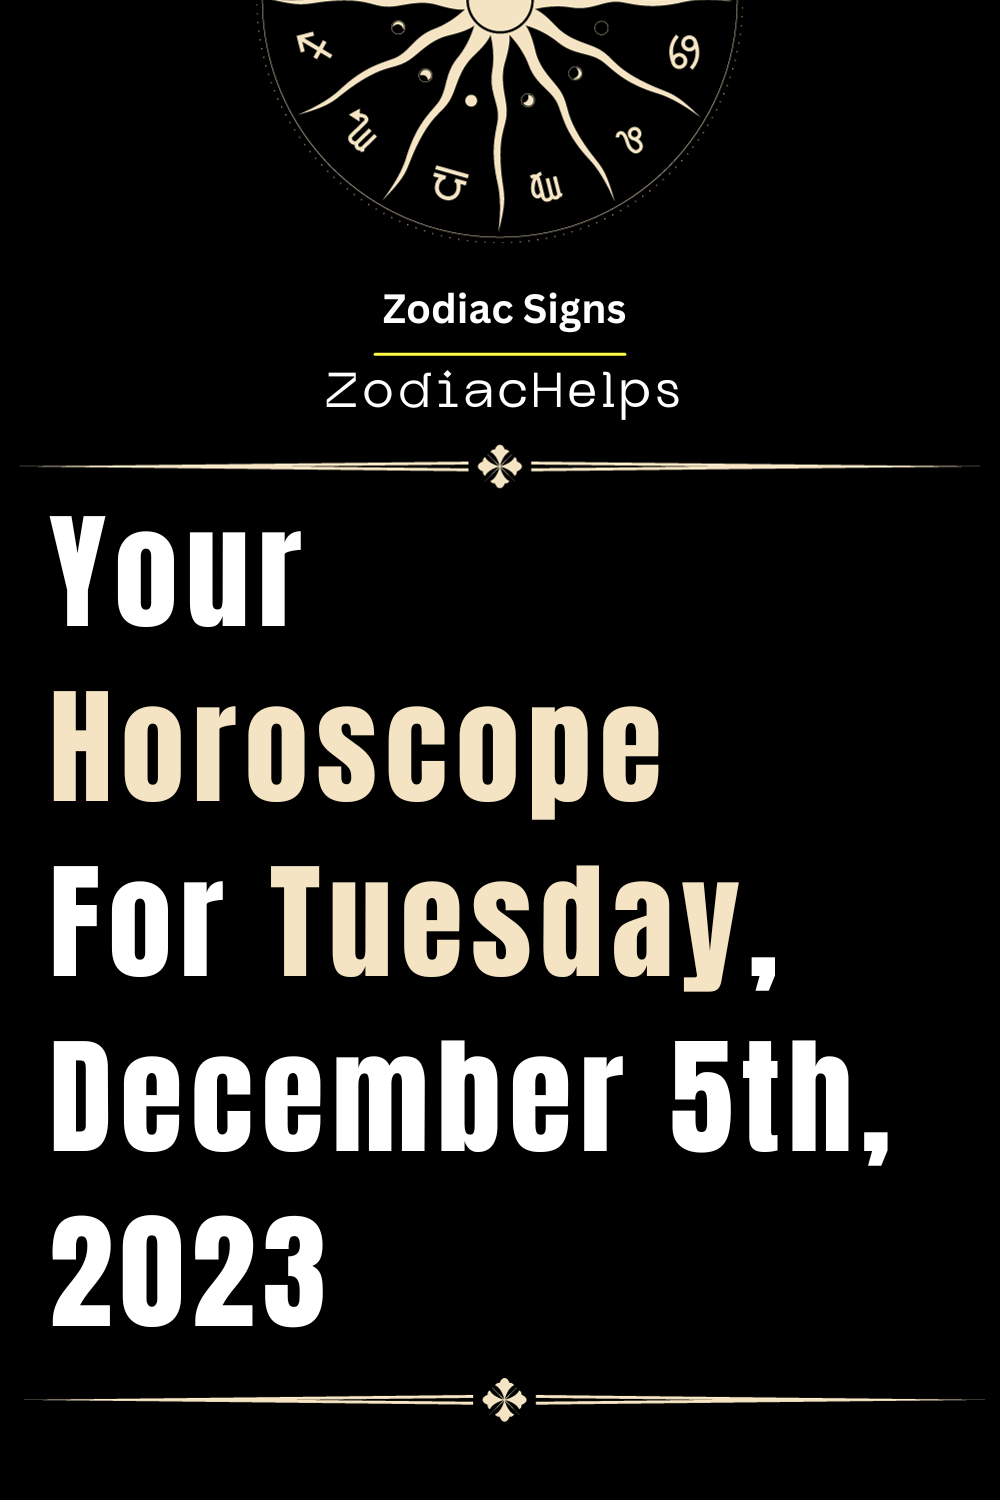 Your Horoscope For Tuesday, December 5th, 2023